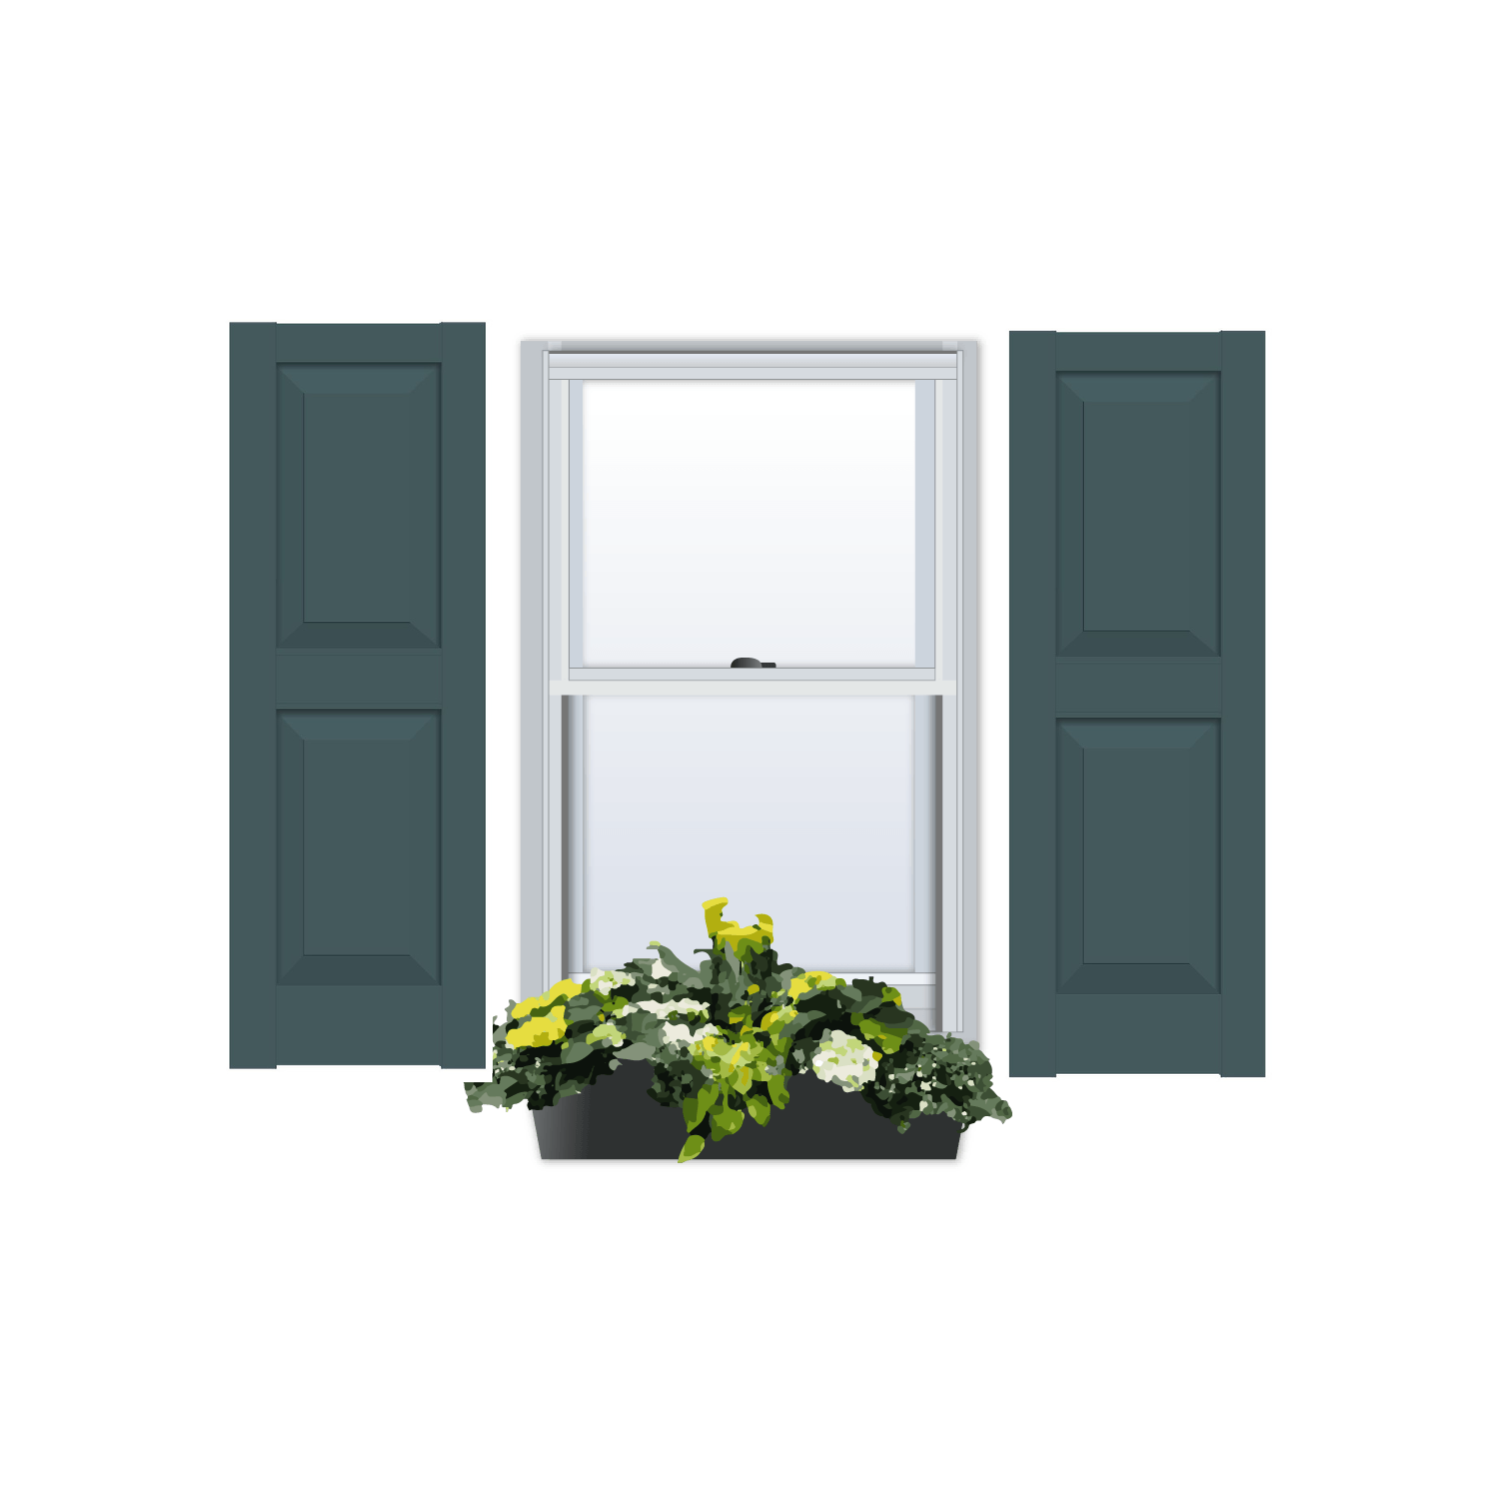 PVC | Raised Panel Exterior Shutters | Two Equal Sections | 1 Pair